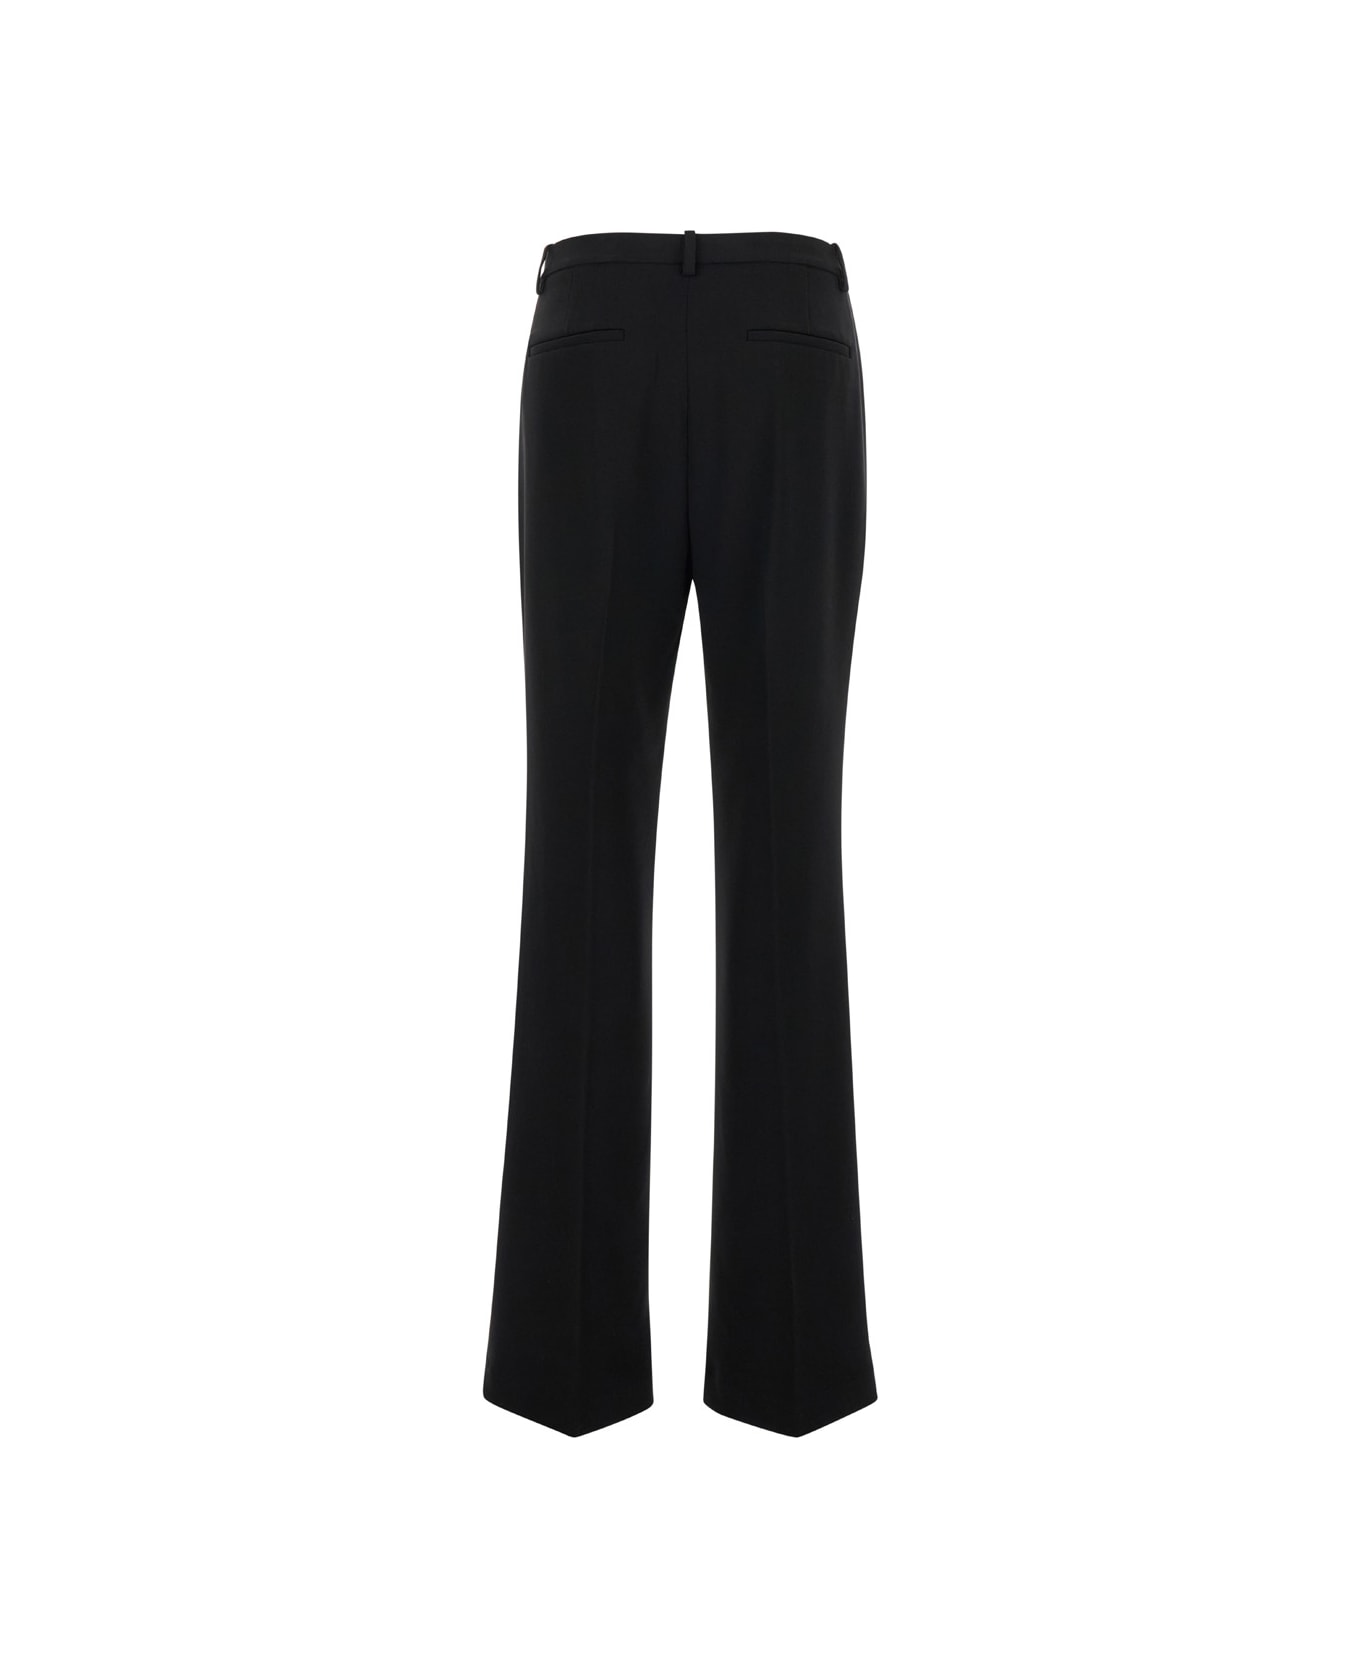 Theory Black Sartorial Pants With Stretch Pleat In Technical Fabric Woman - Black